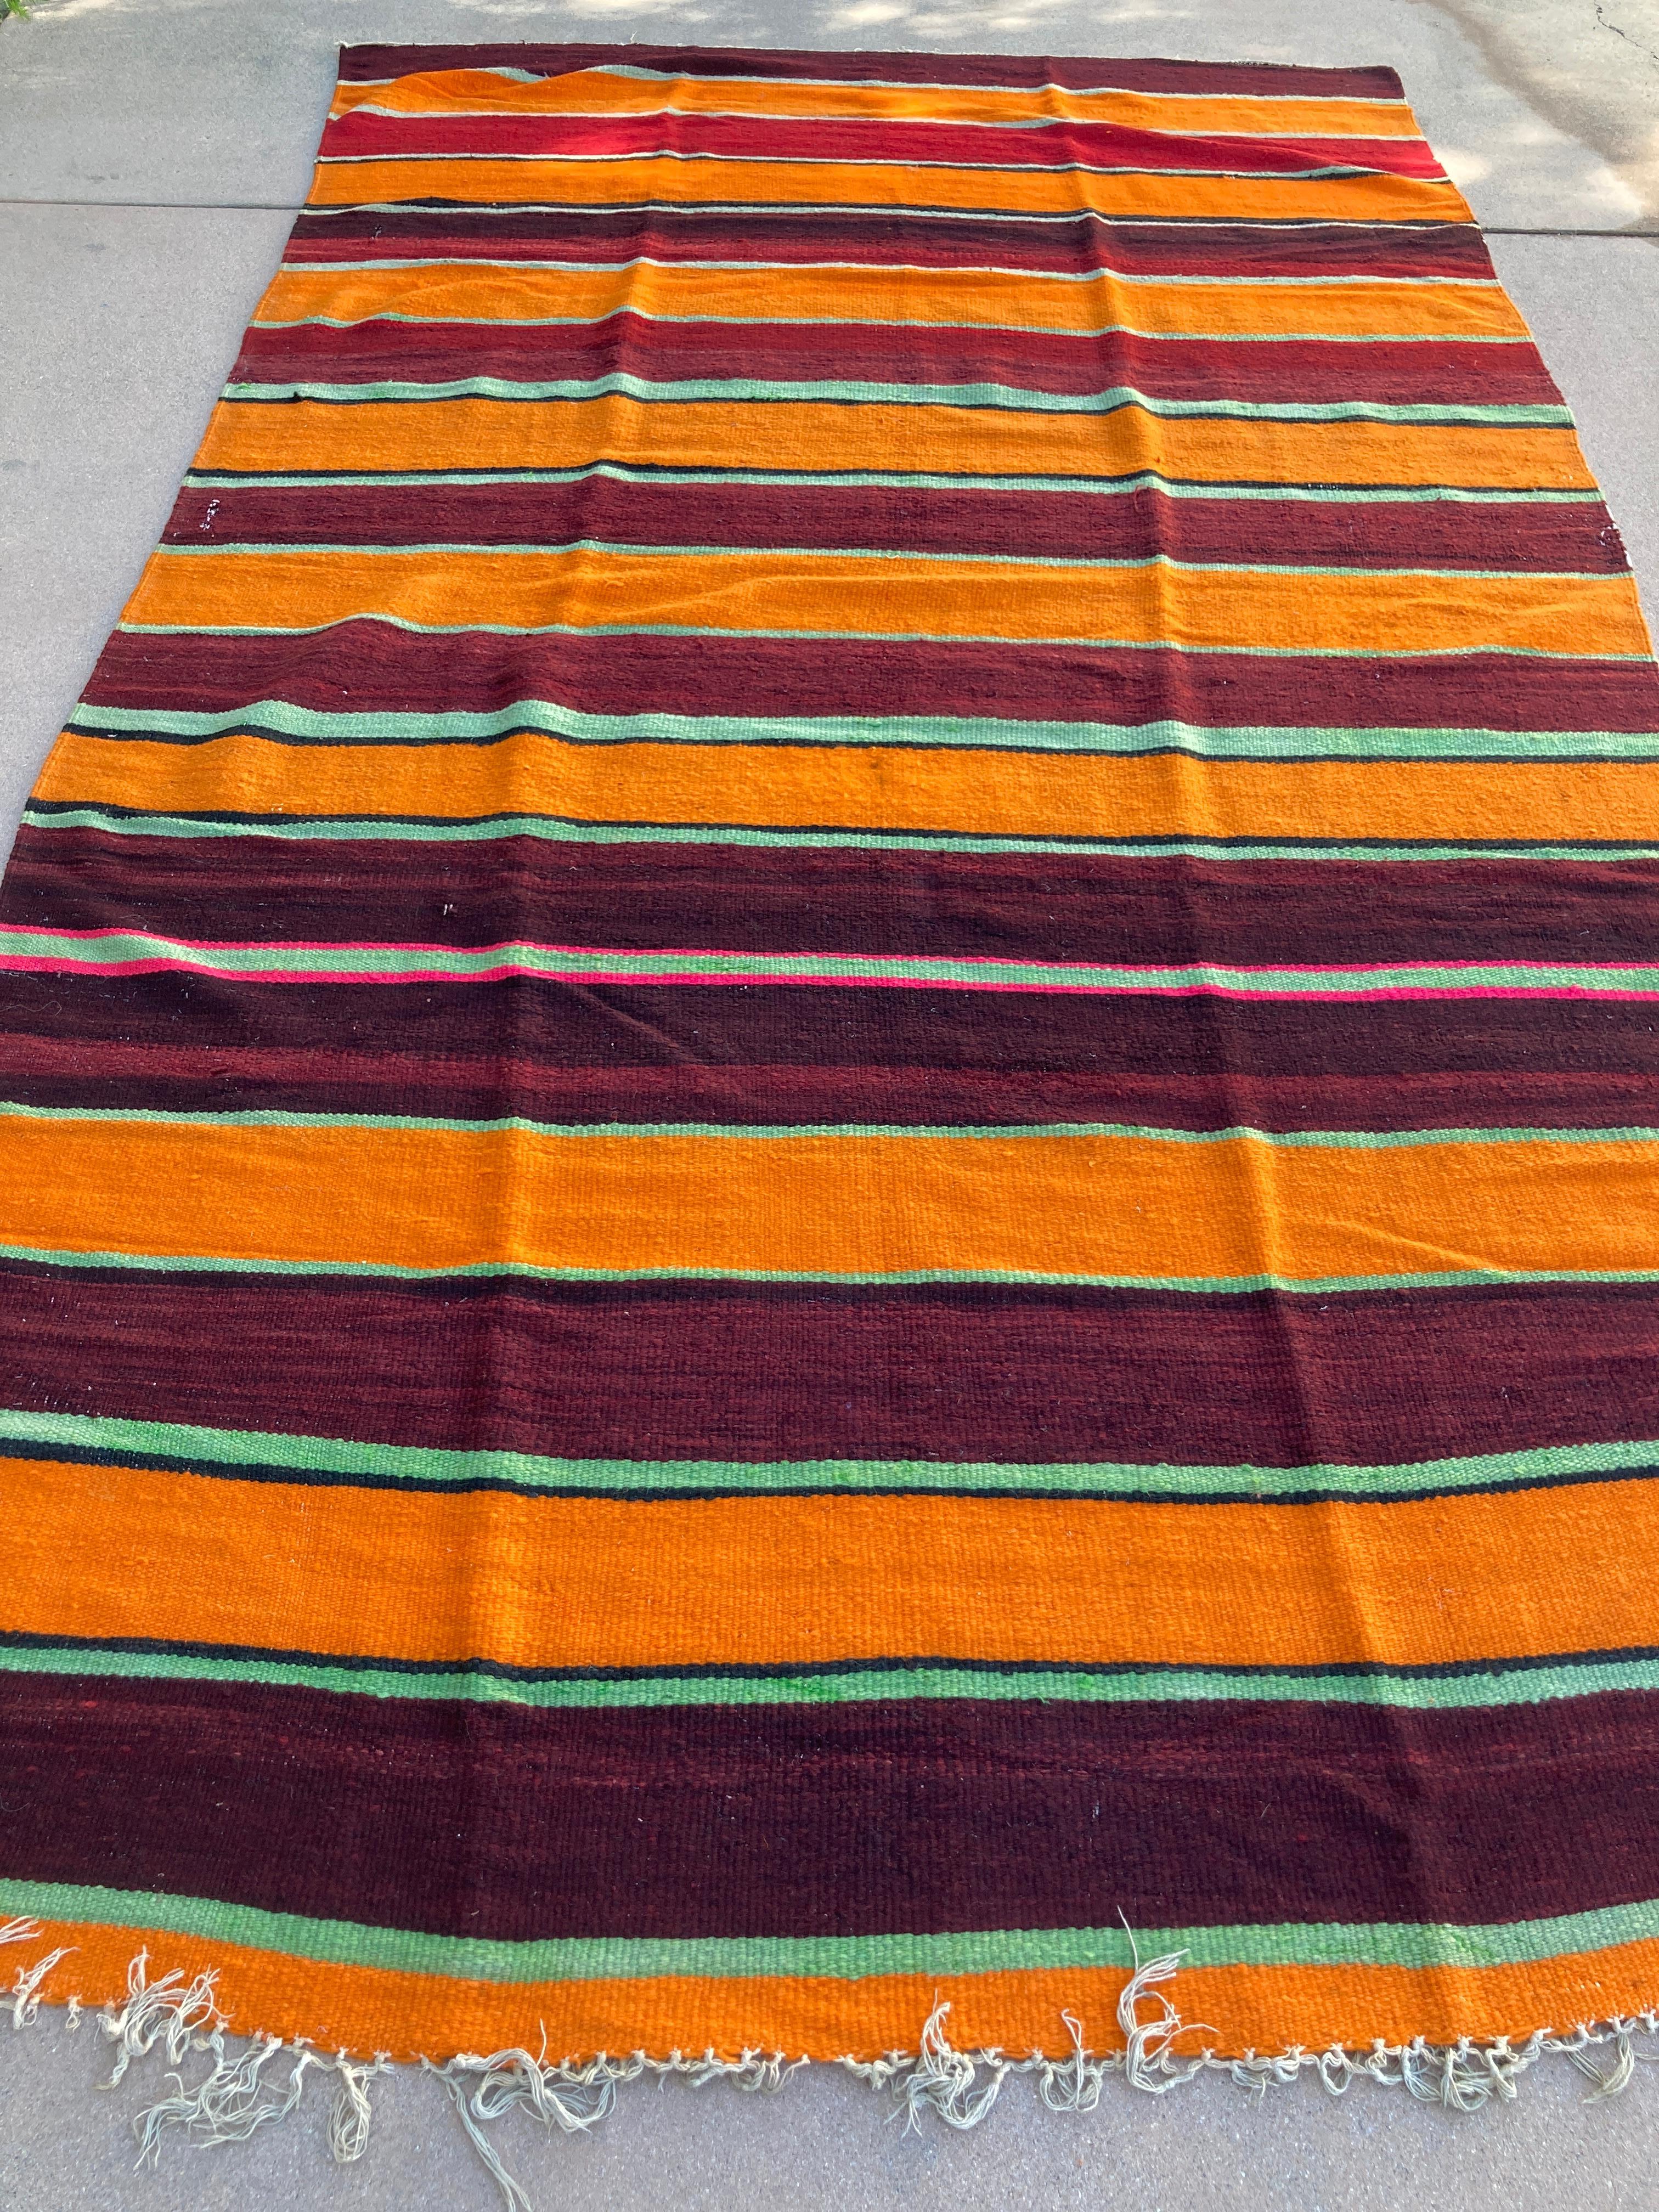 Vintage Moroccan flat-weave Kilim rug.
Large size vintage Moroccan rug, handwoven by Berber women in Morocco for their own use.
This etnic rug was made using flat-weave technique with linear pattern of alternating stripes in different colors in